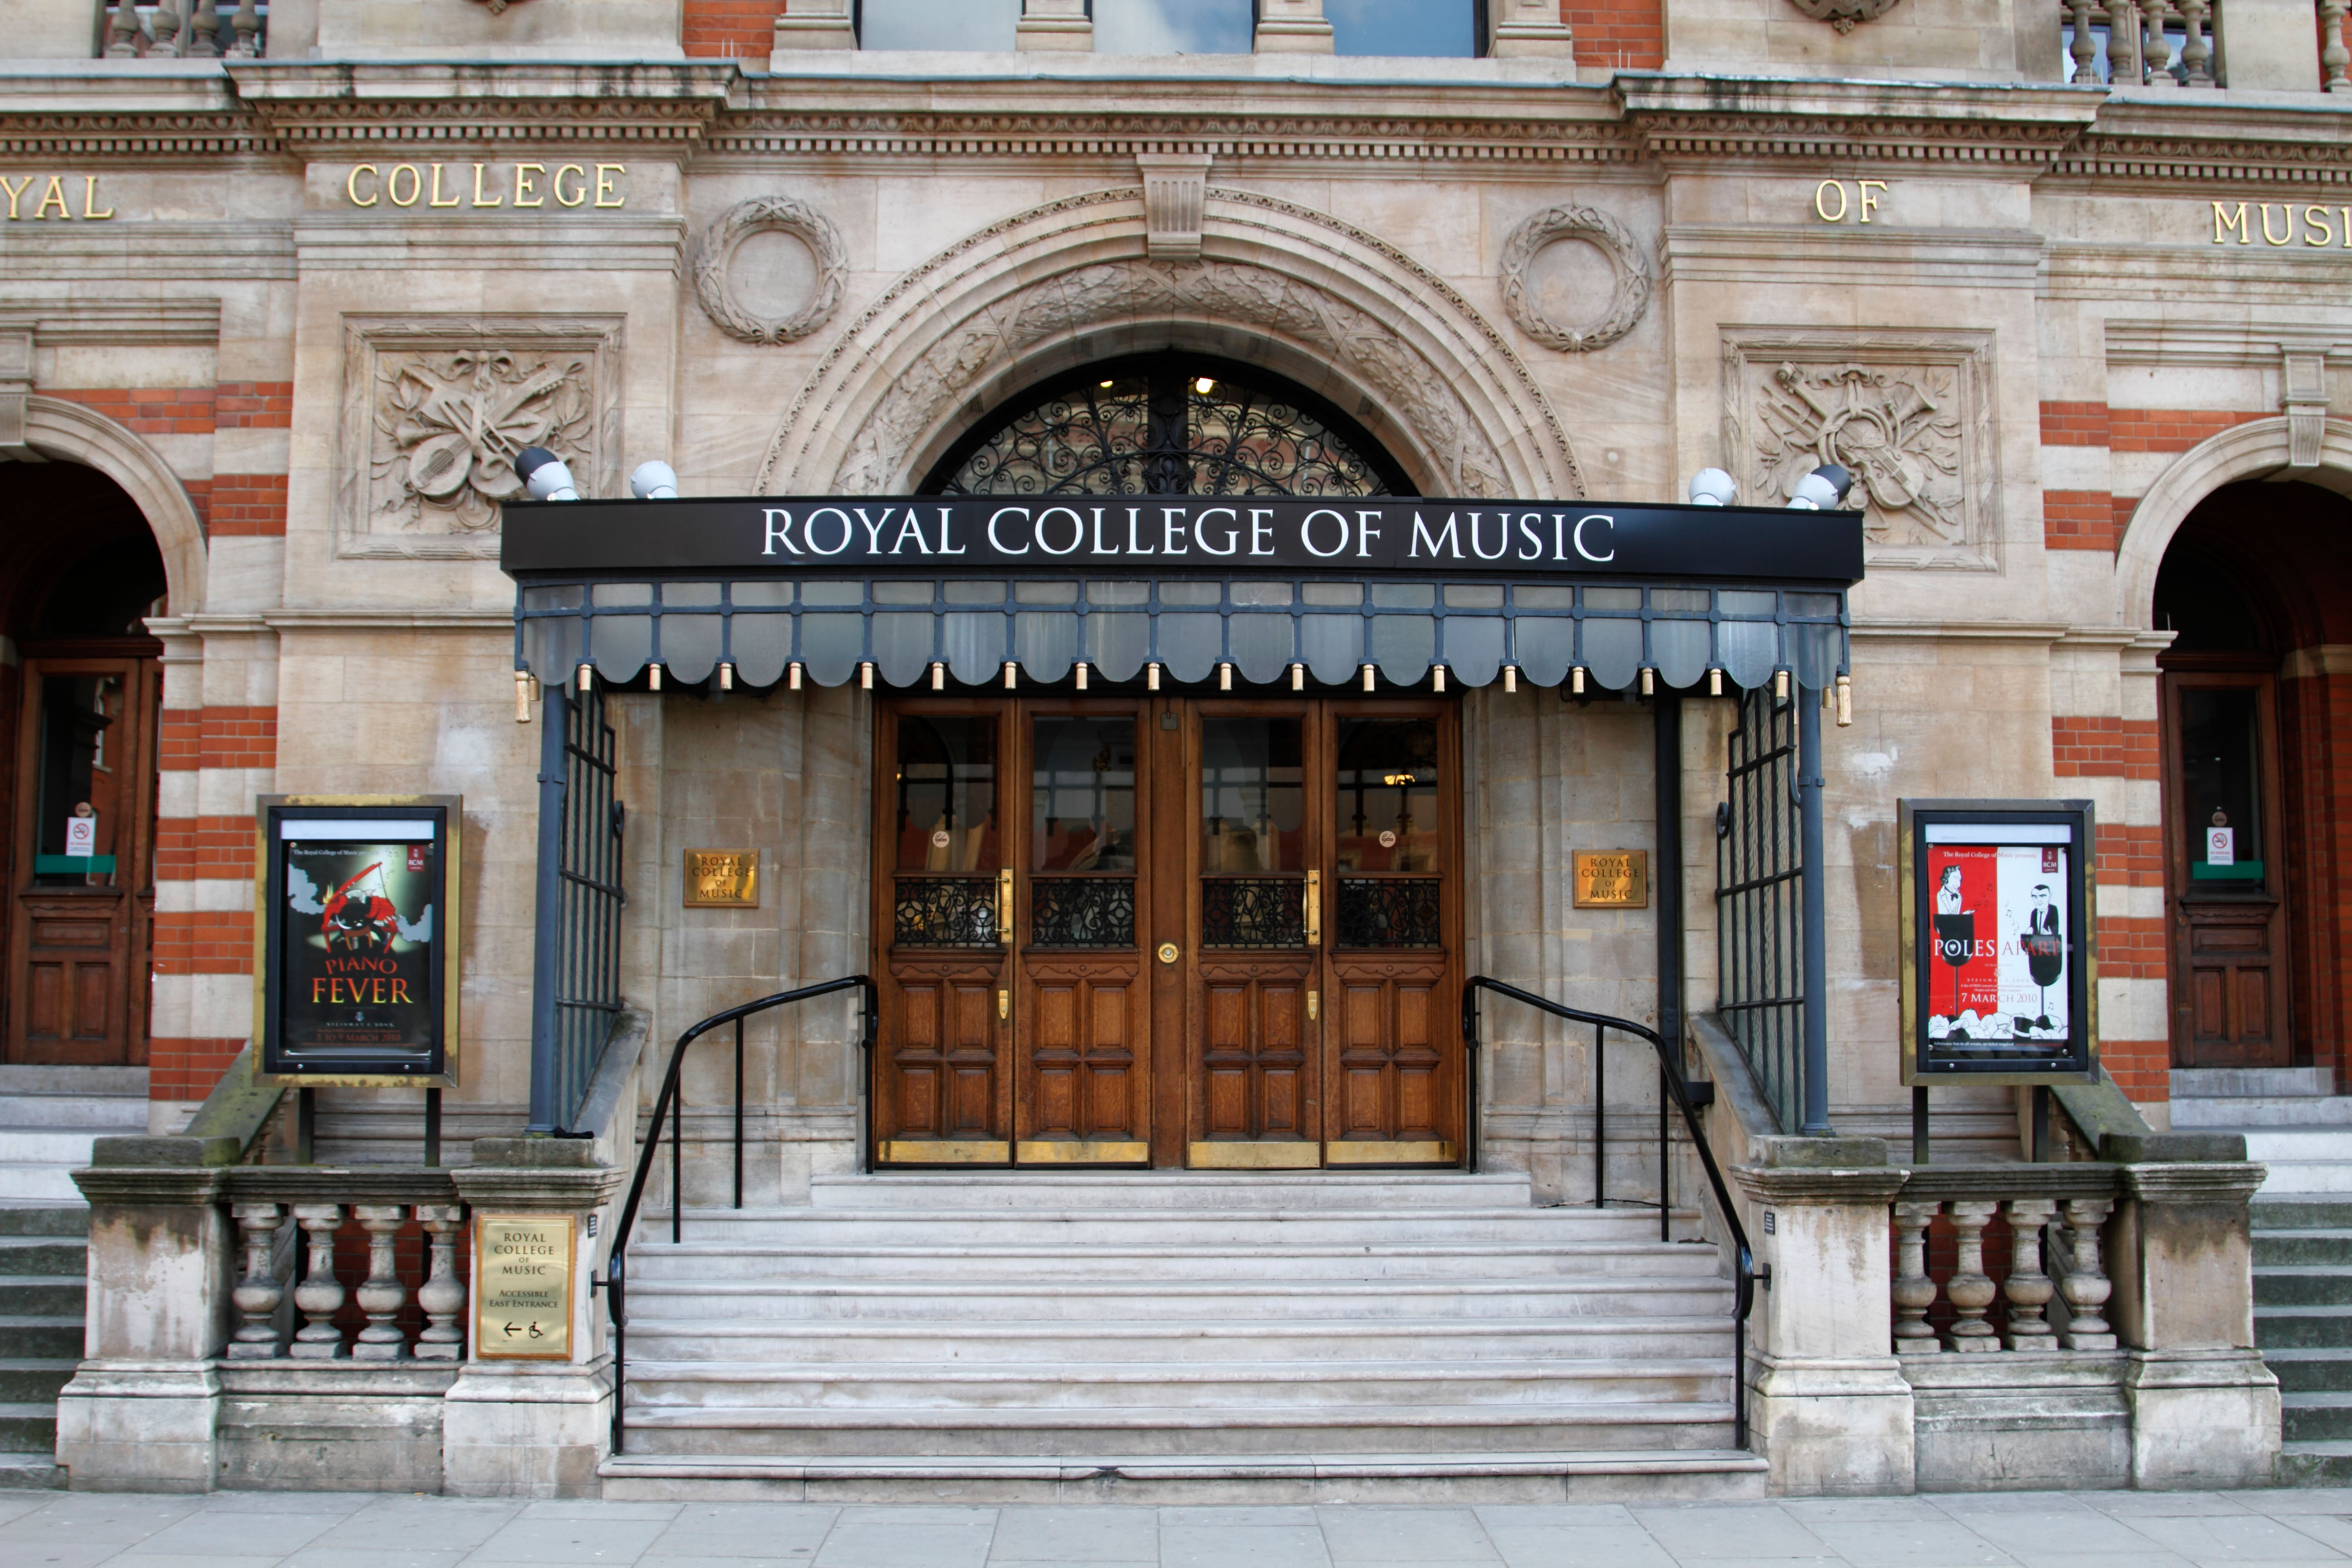 The Royal College of Music in London